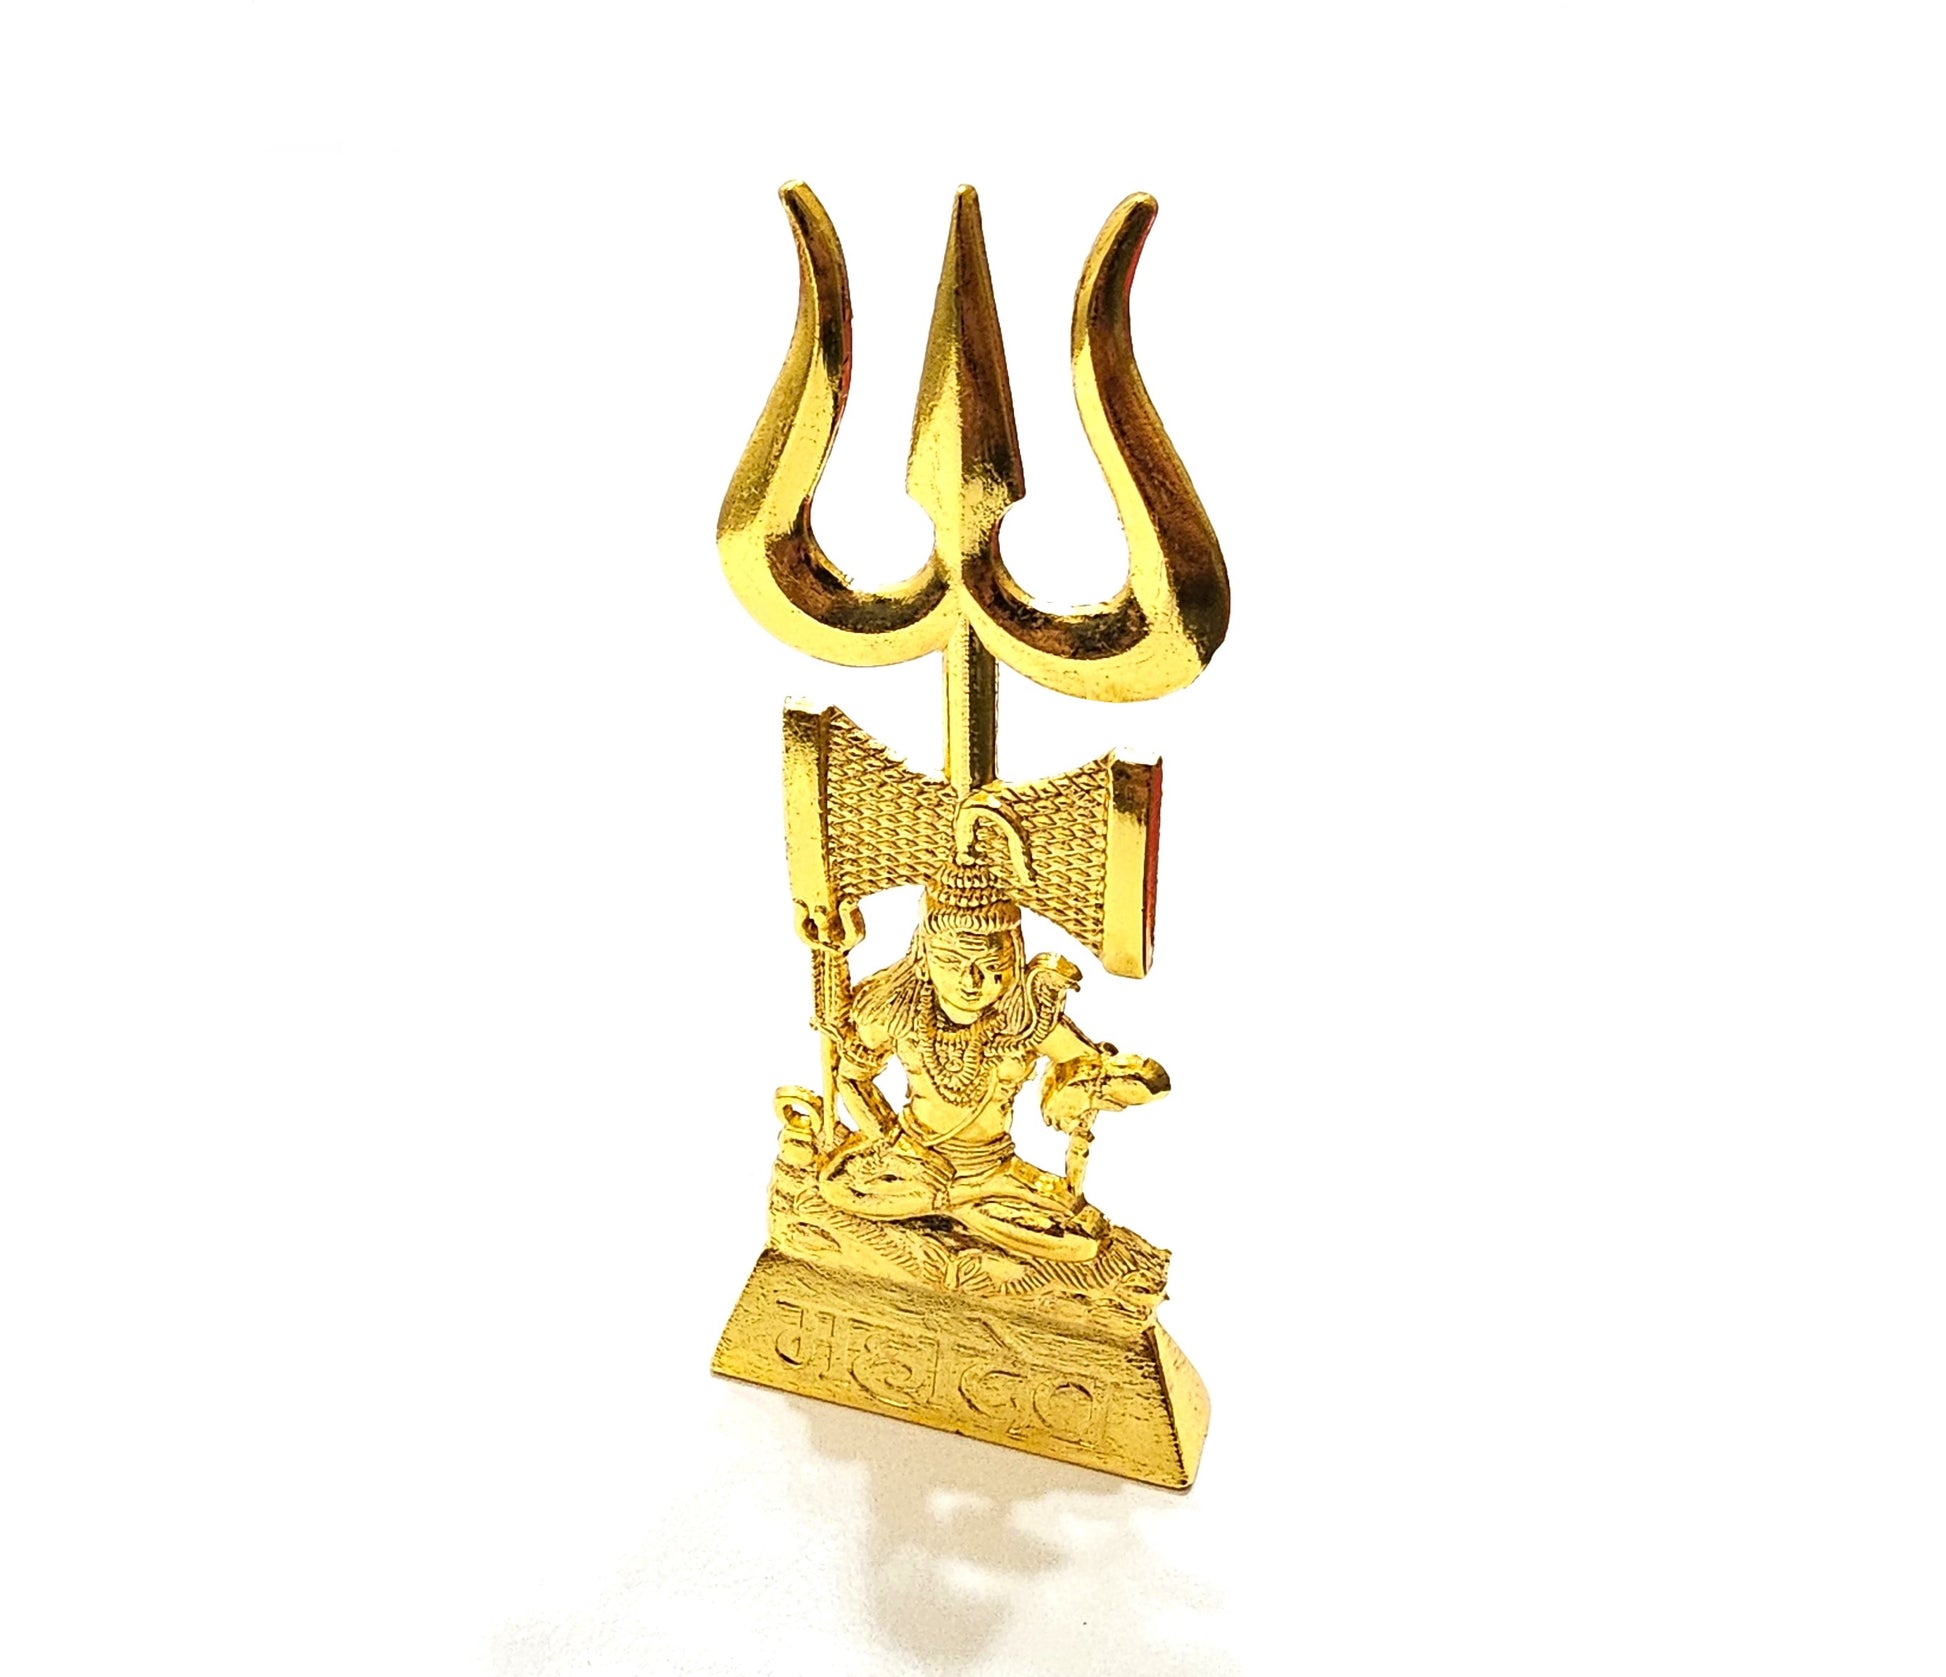 Lord Shiva and Trident statue